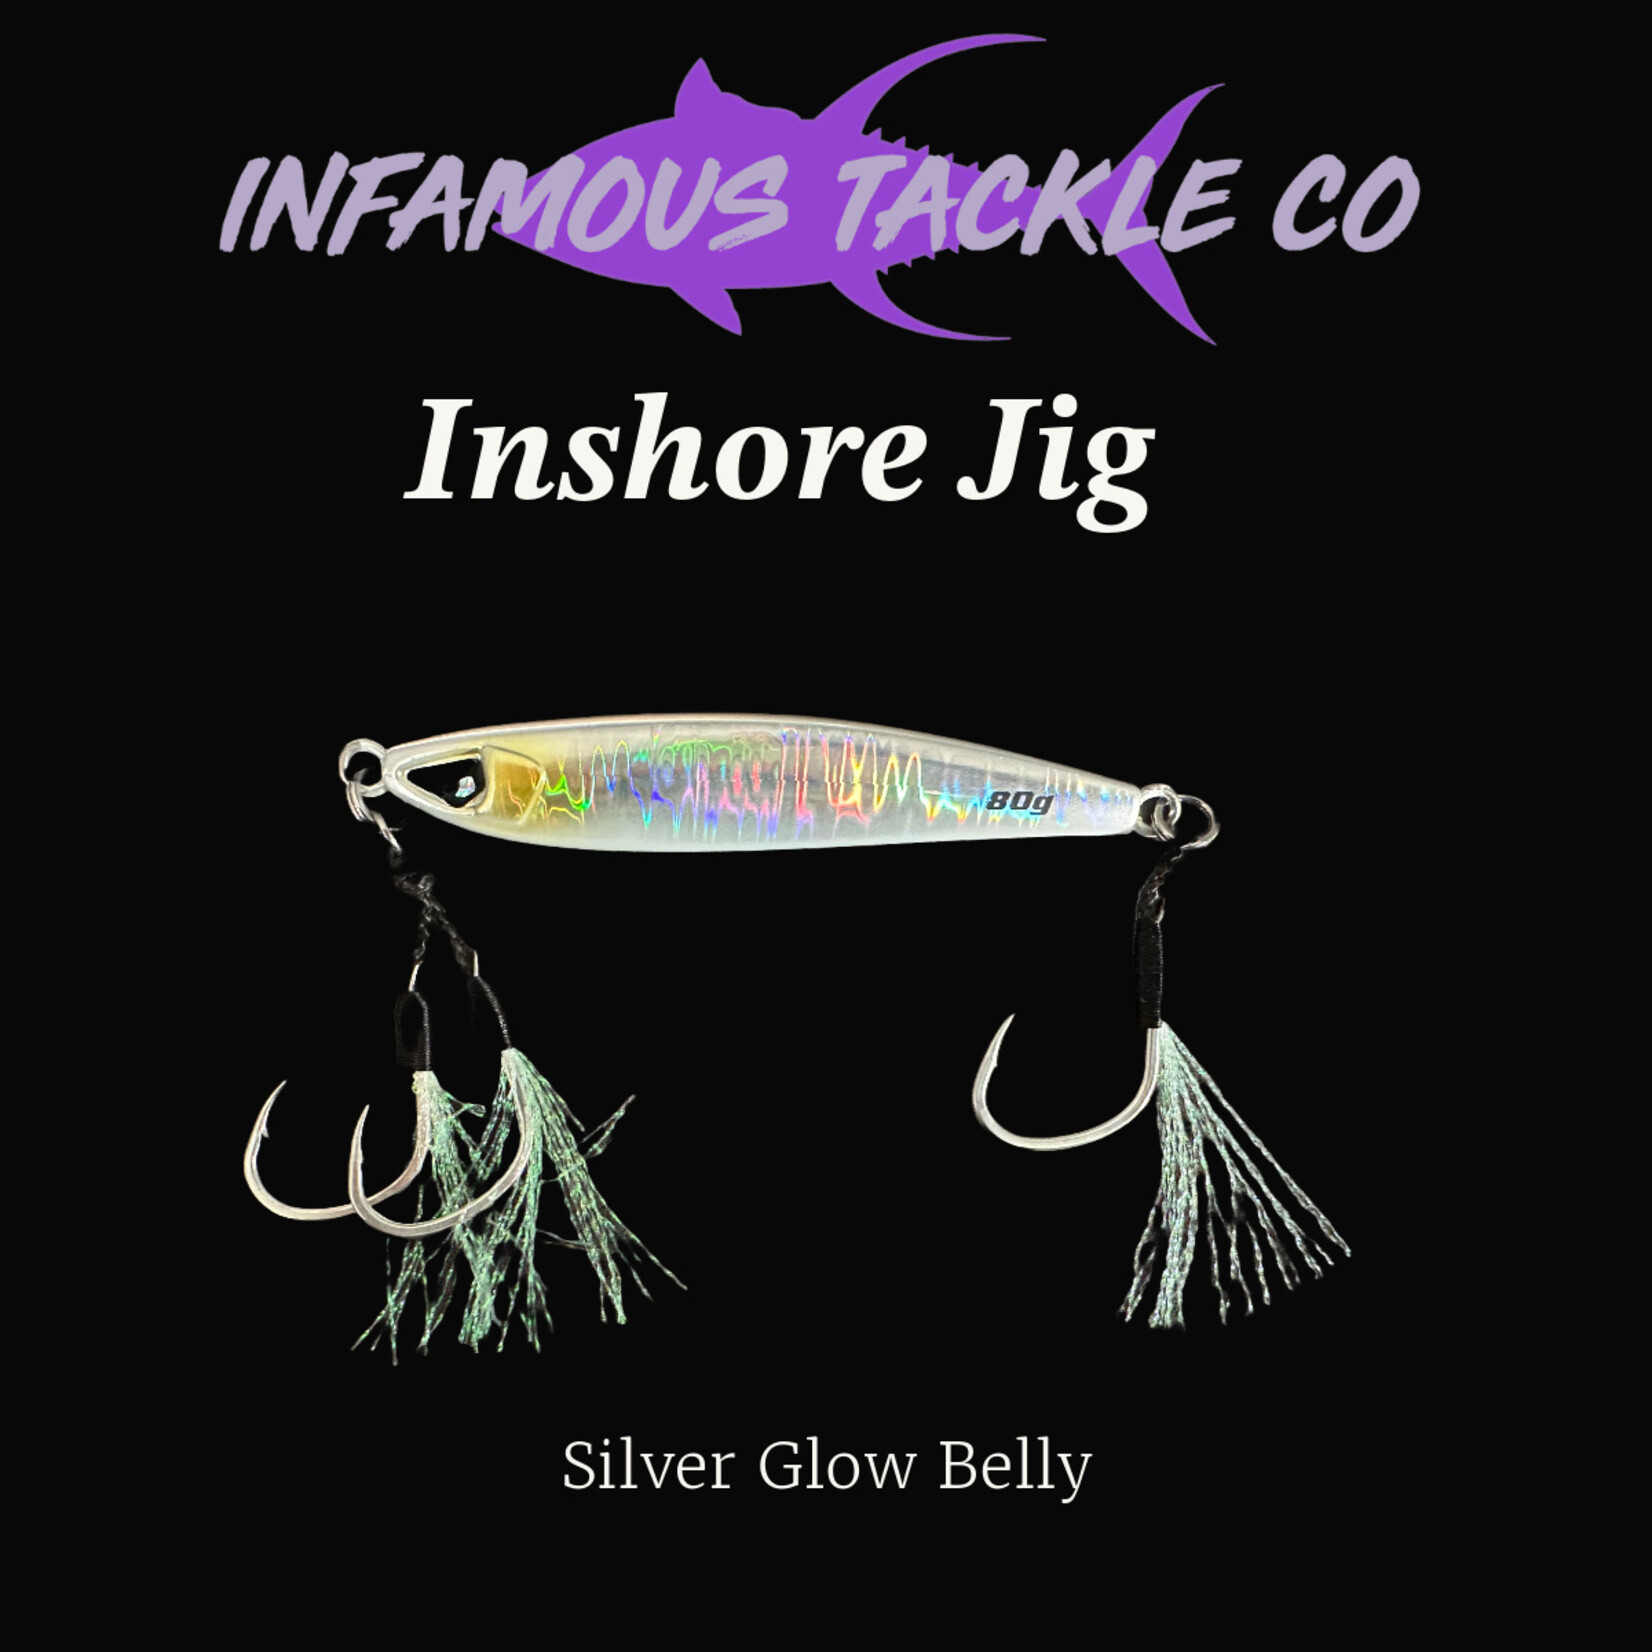 Infamous Tackle Co. Inshore Jig